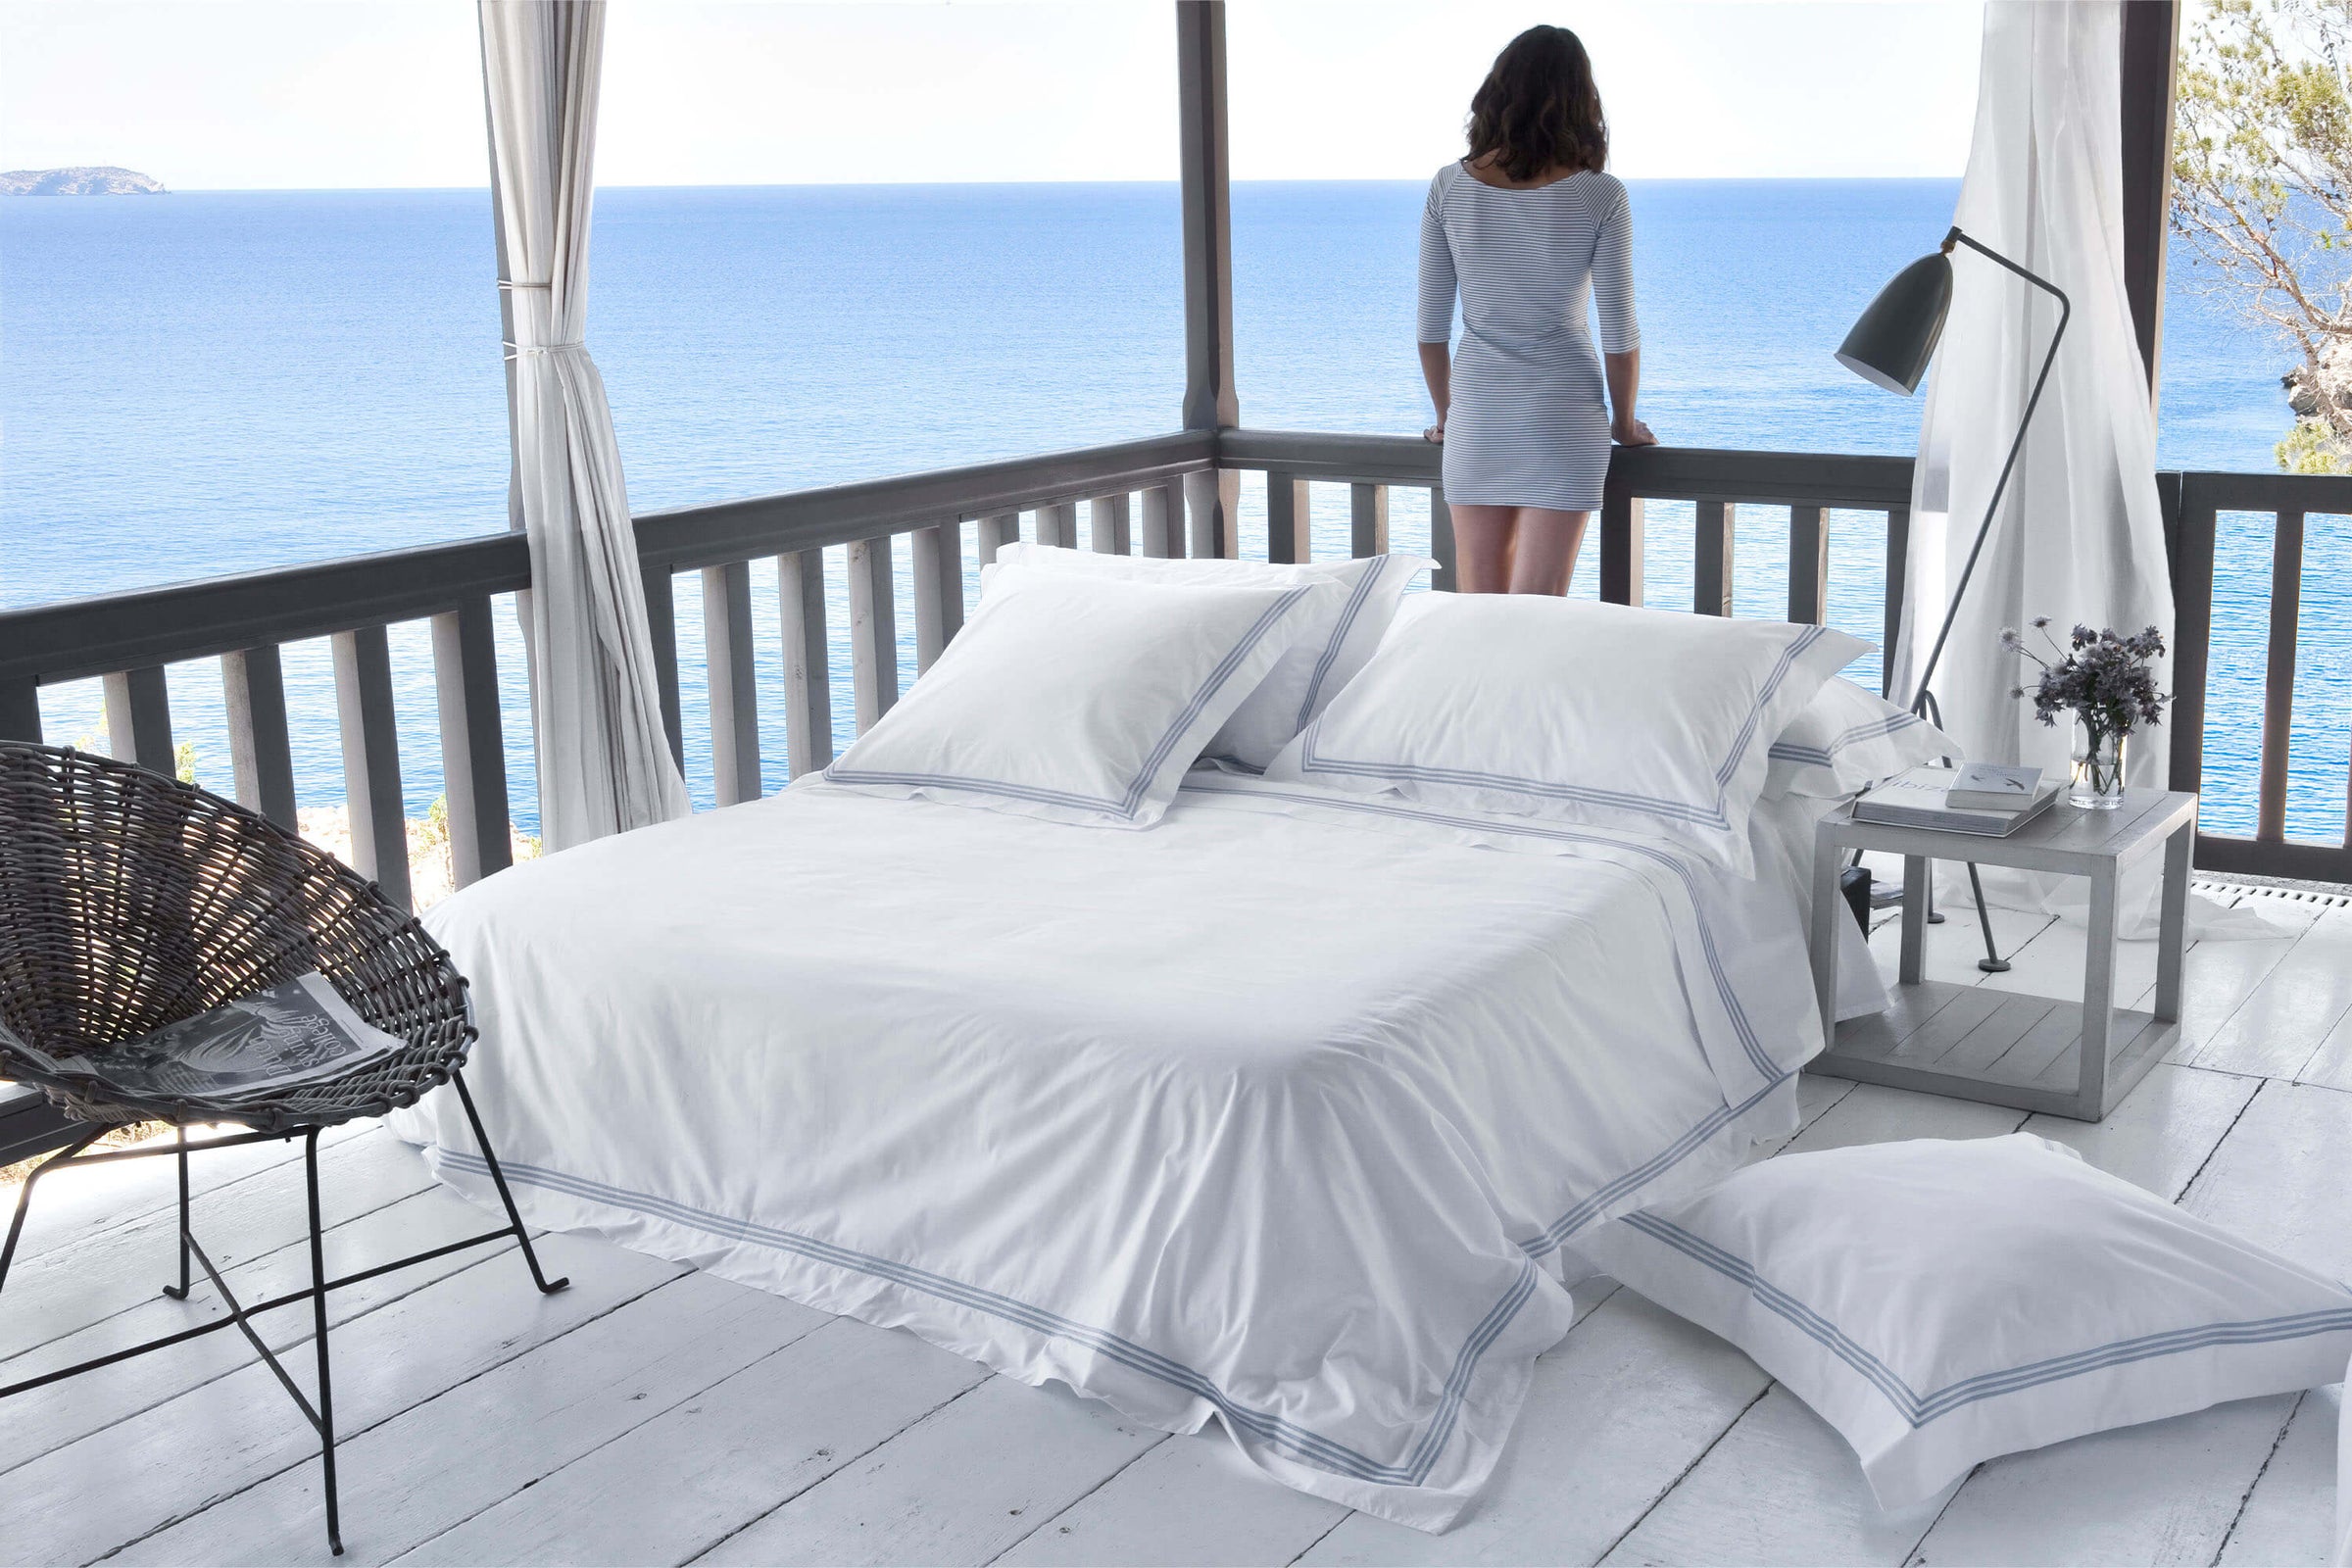 Luxury white percale bedding with triple chord stitch detailing in sky blue